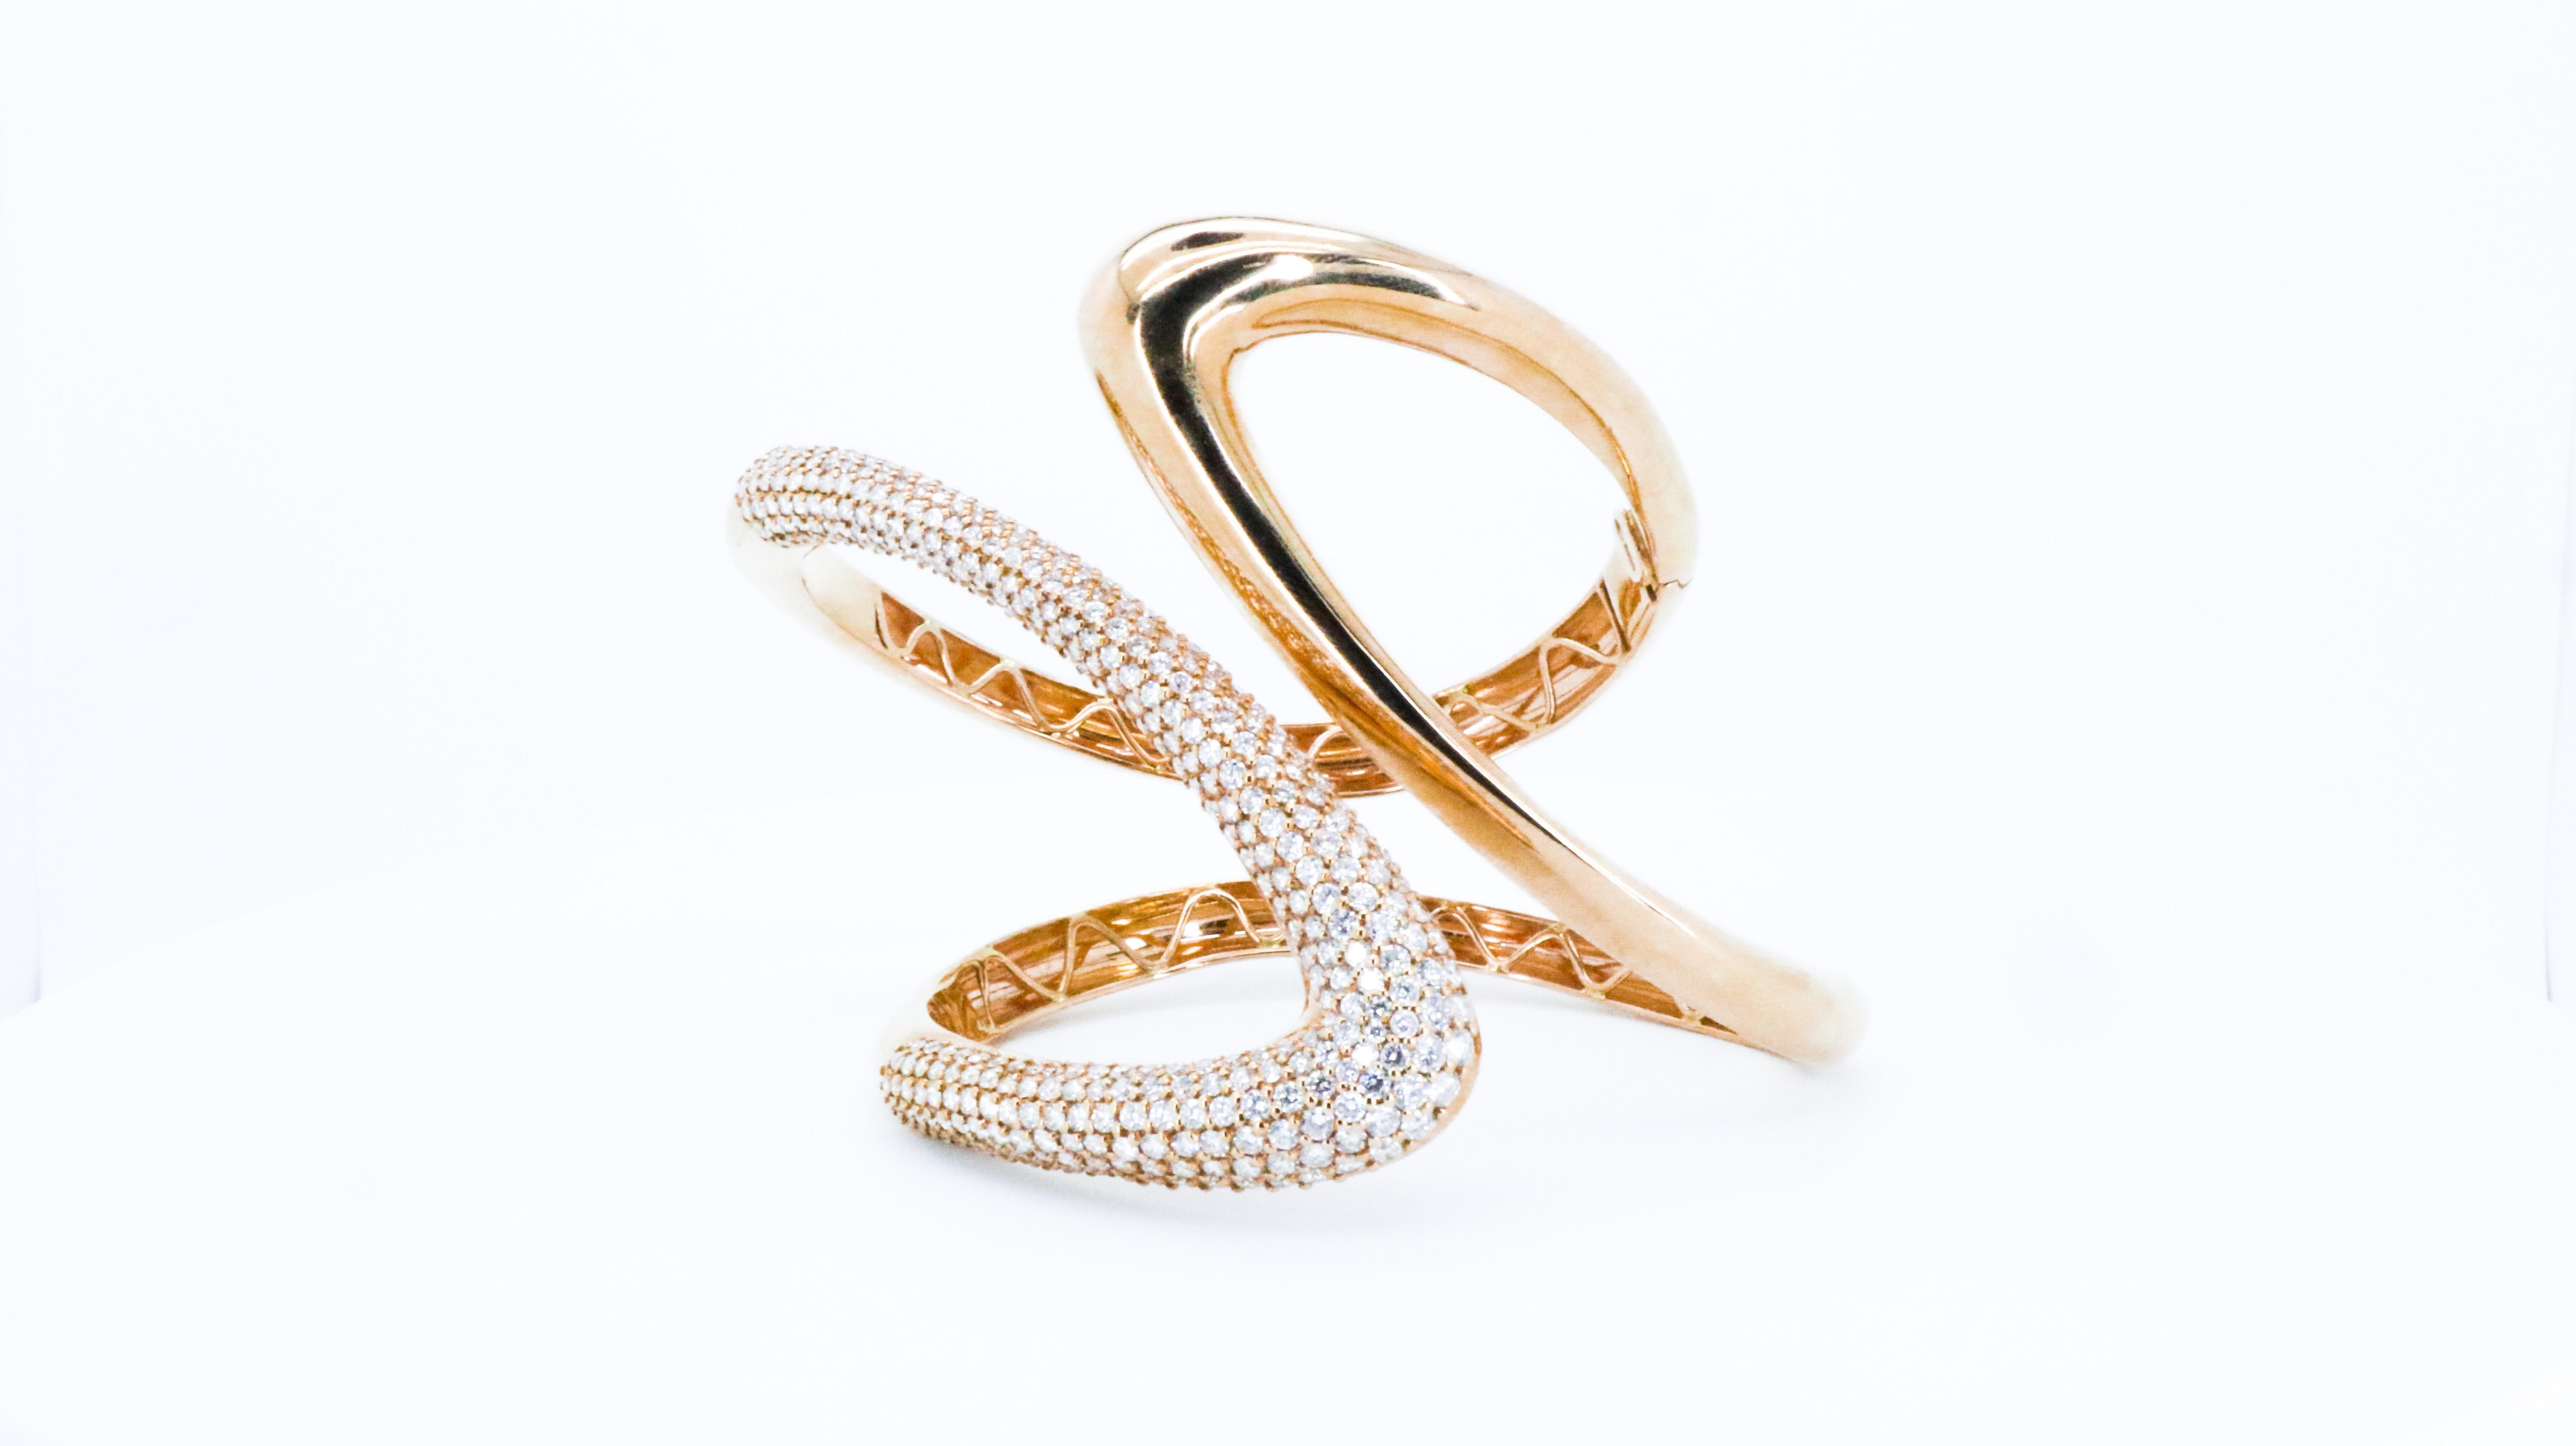 Contemporary Beatrice Barzaghi Awarded 9 Ct Diamond Pave Gold Clamper Bracelet For Sale 1